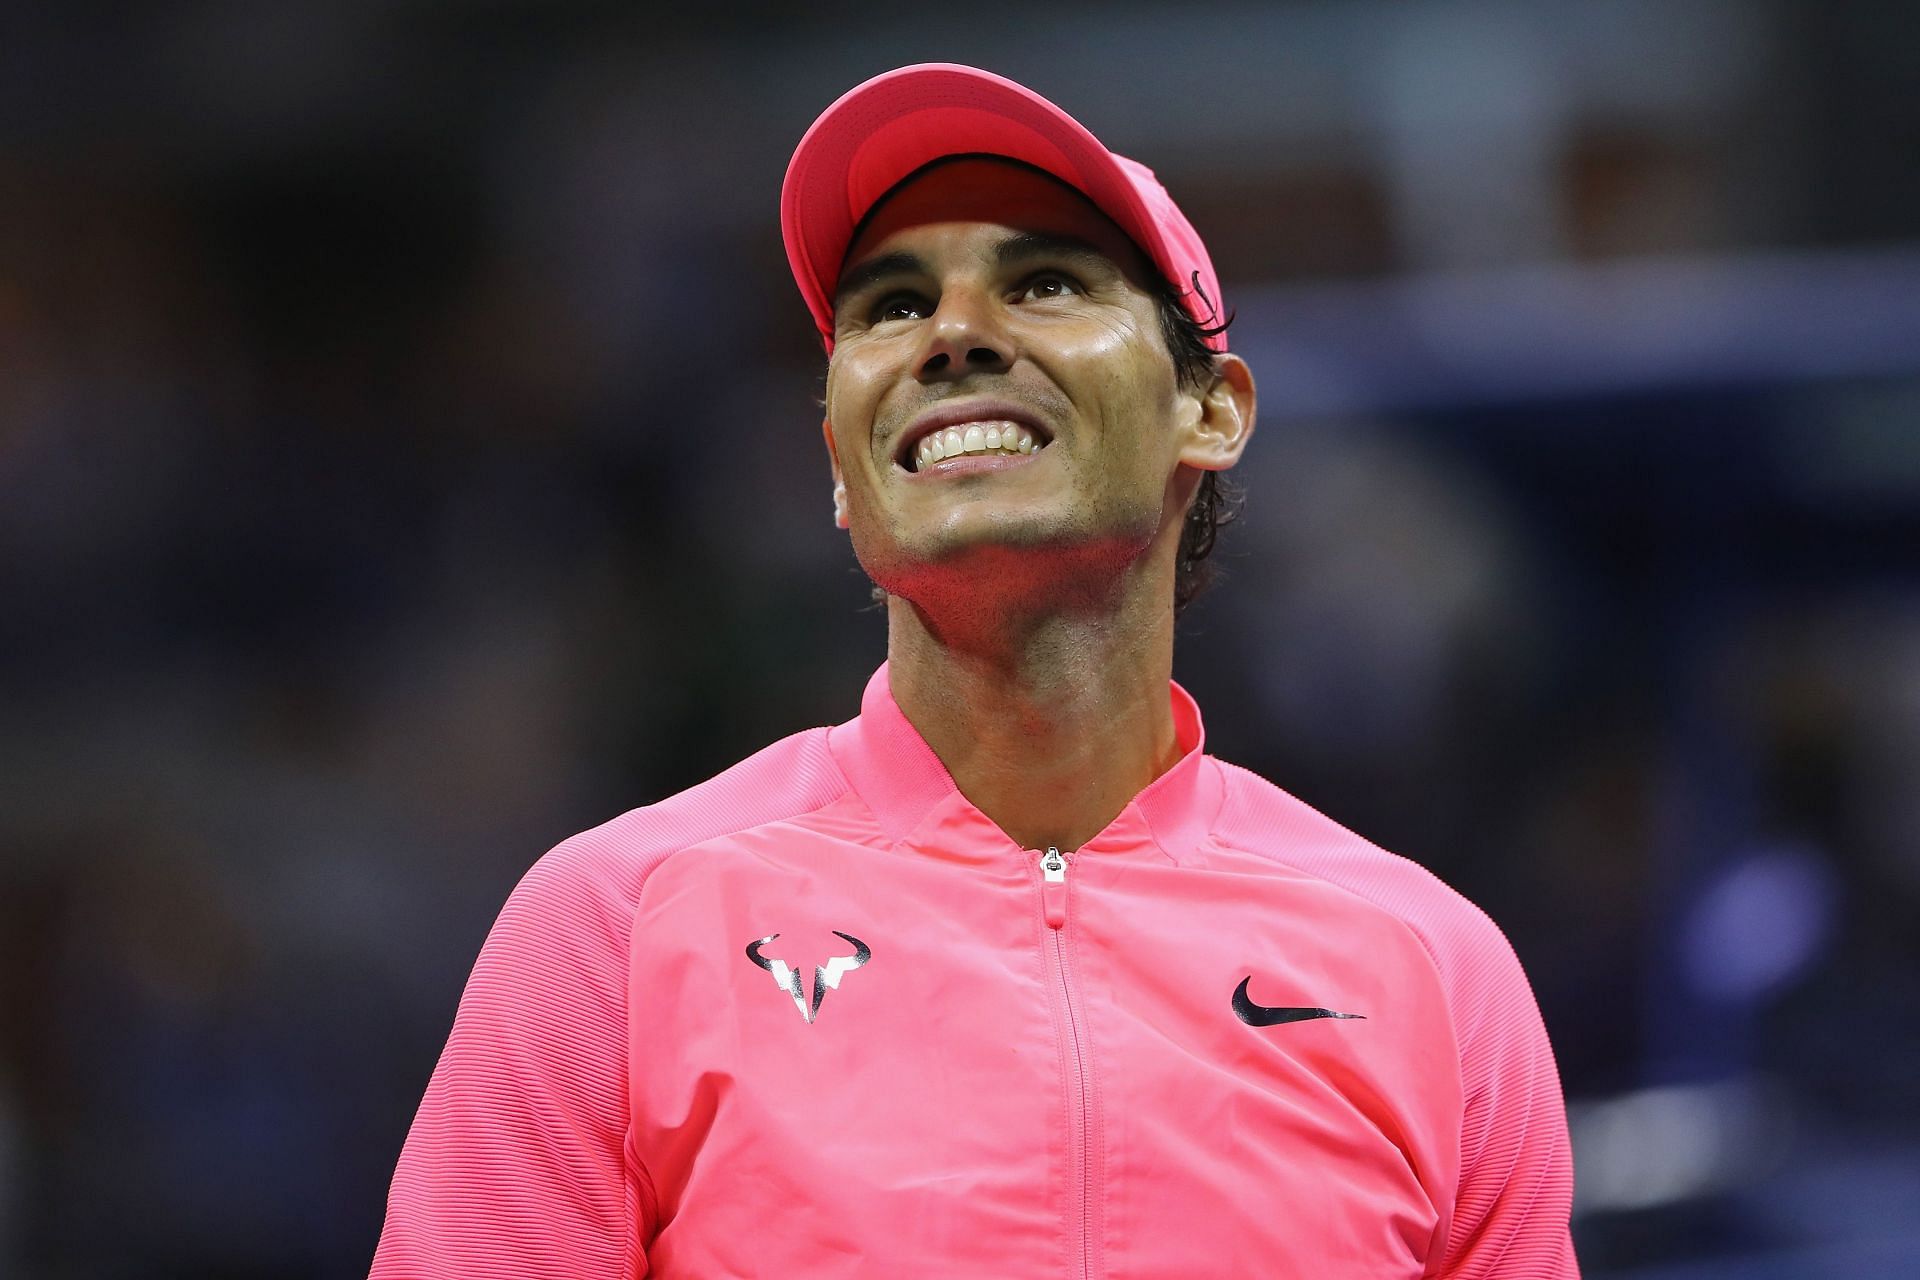 Rafael Nadal's outfits for the US Open series 2022 revealed